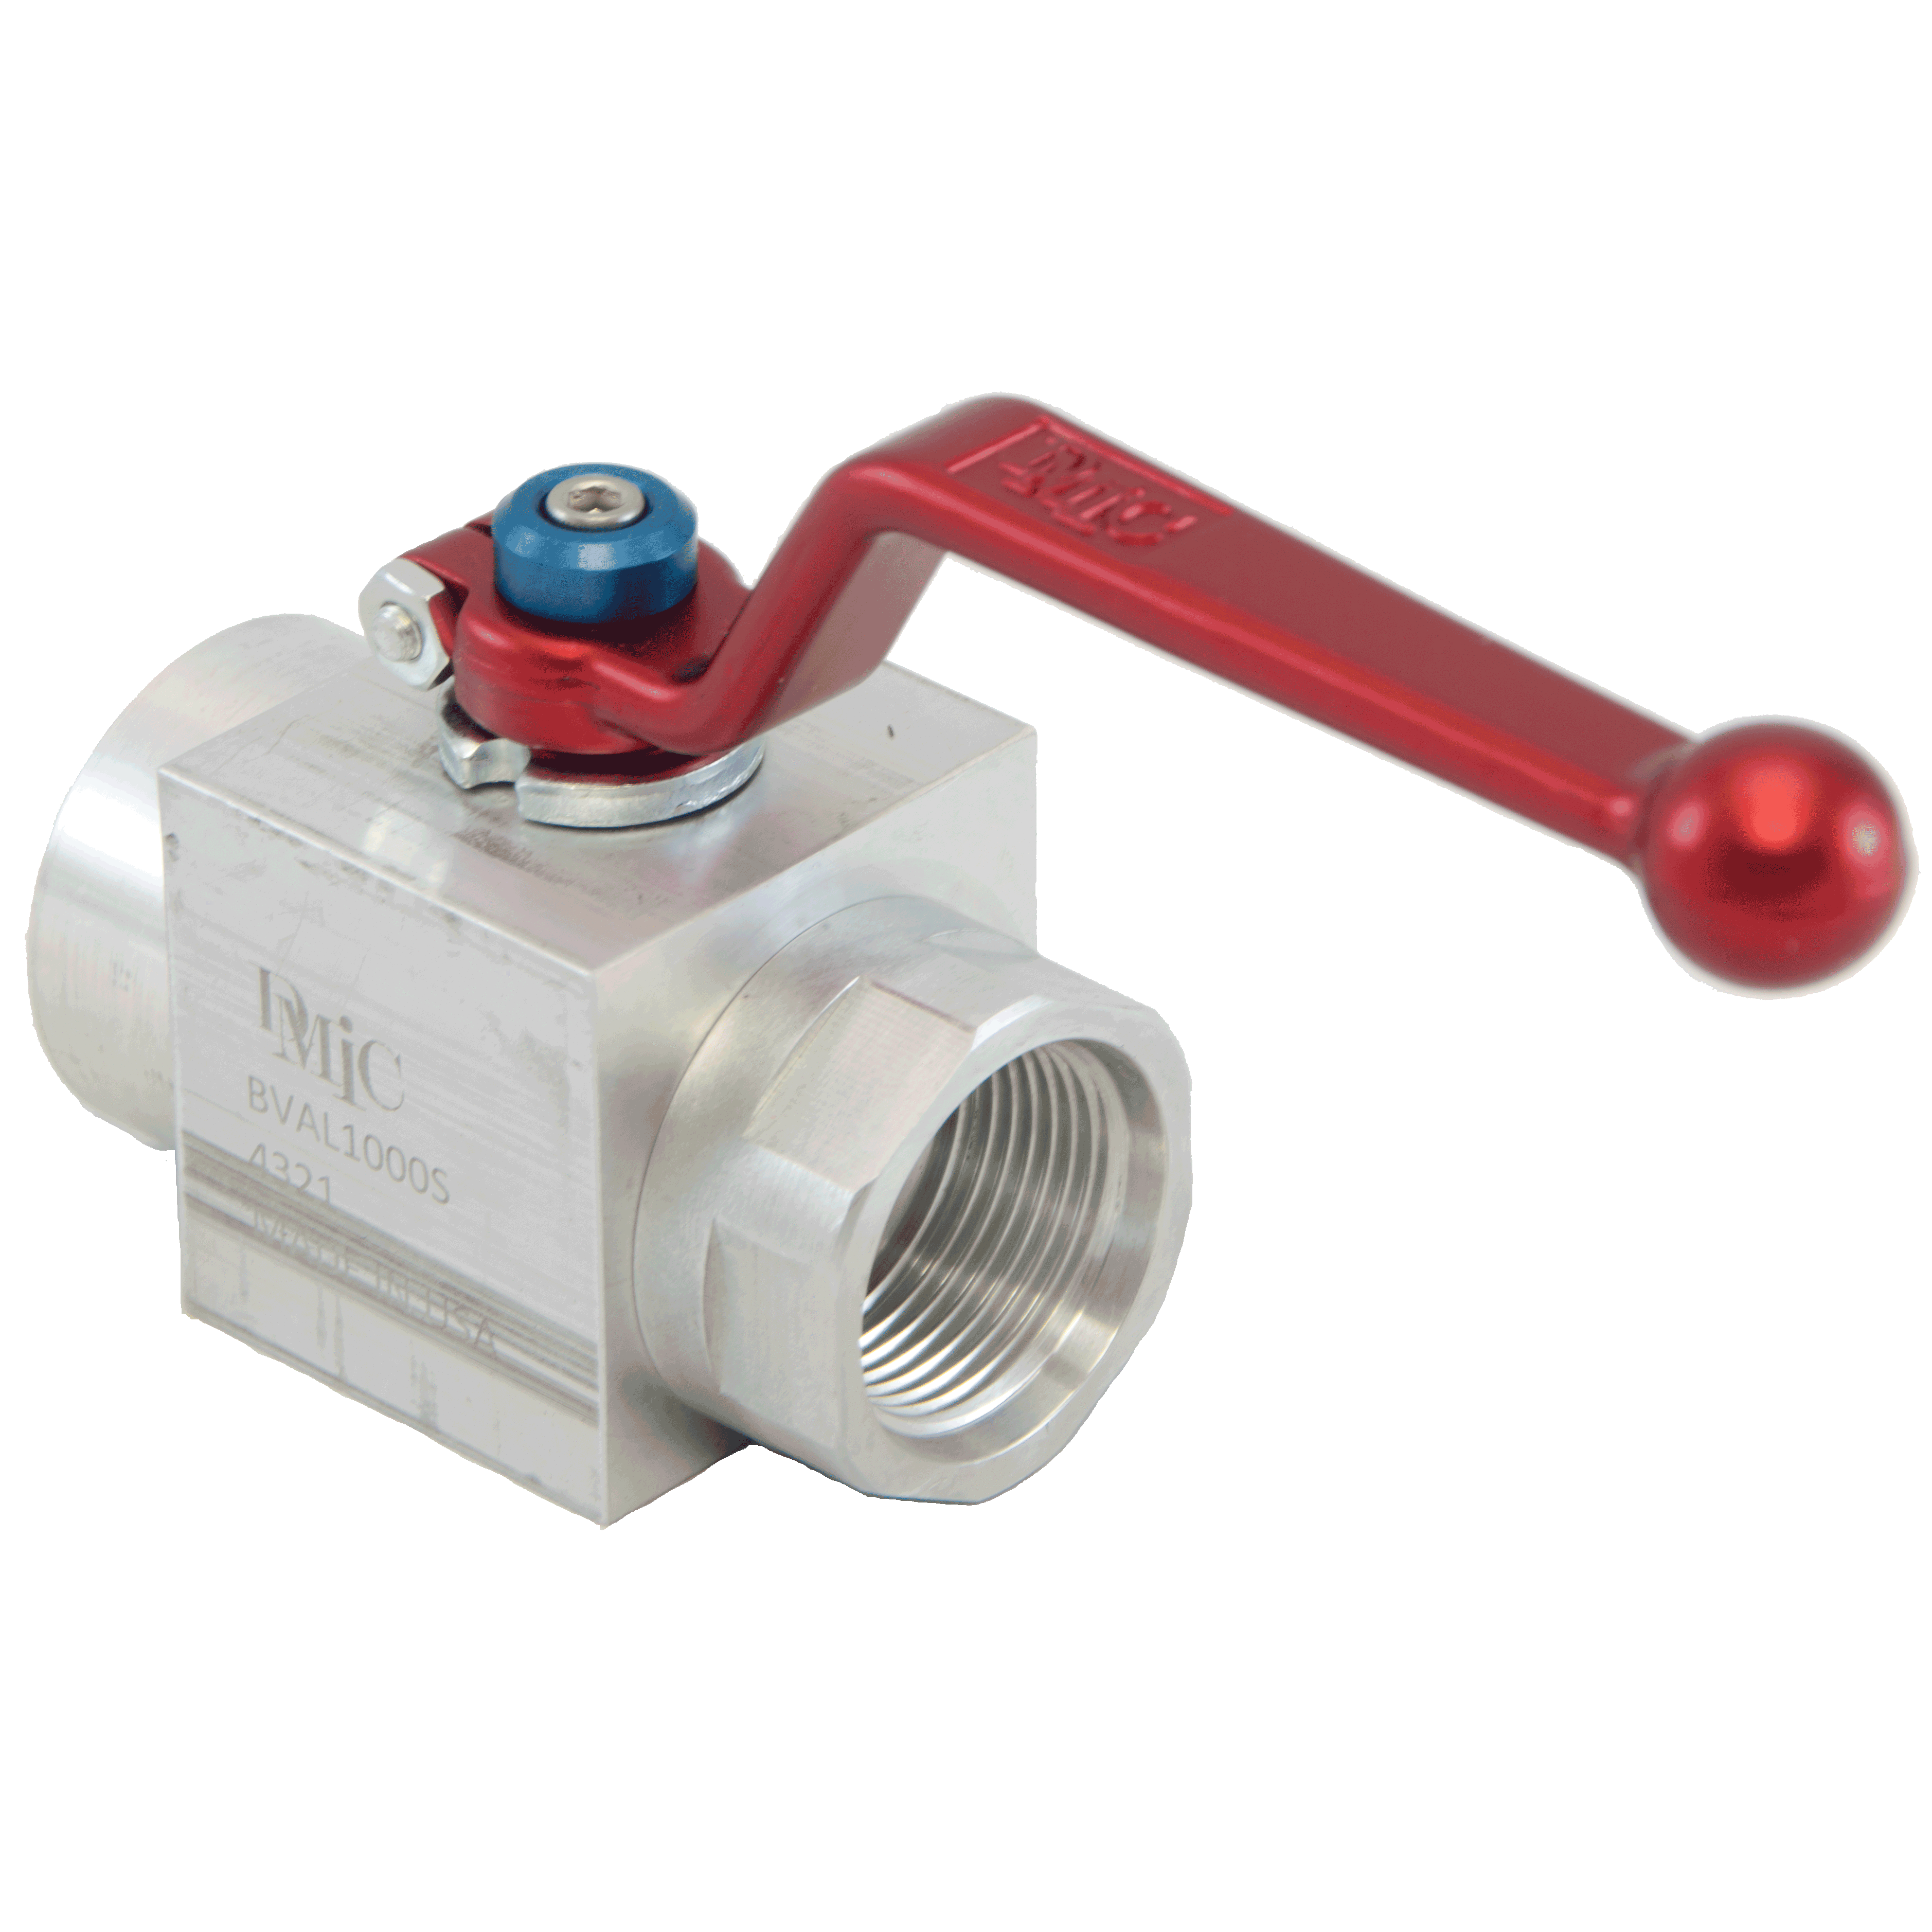 BVAL-1250N-4321-AZZN : DMIC Suction Ball Valve, 1.25 NPT, Aluminum, 600psi, Two-Way, with Locking Handle